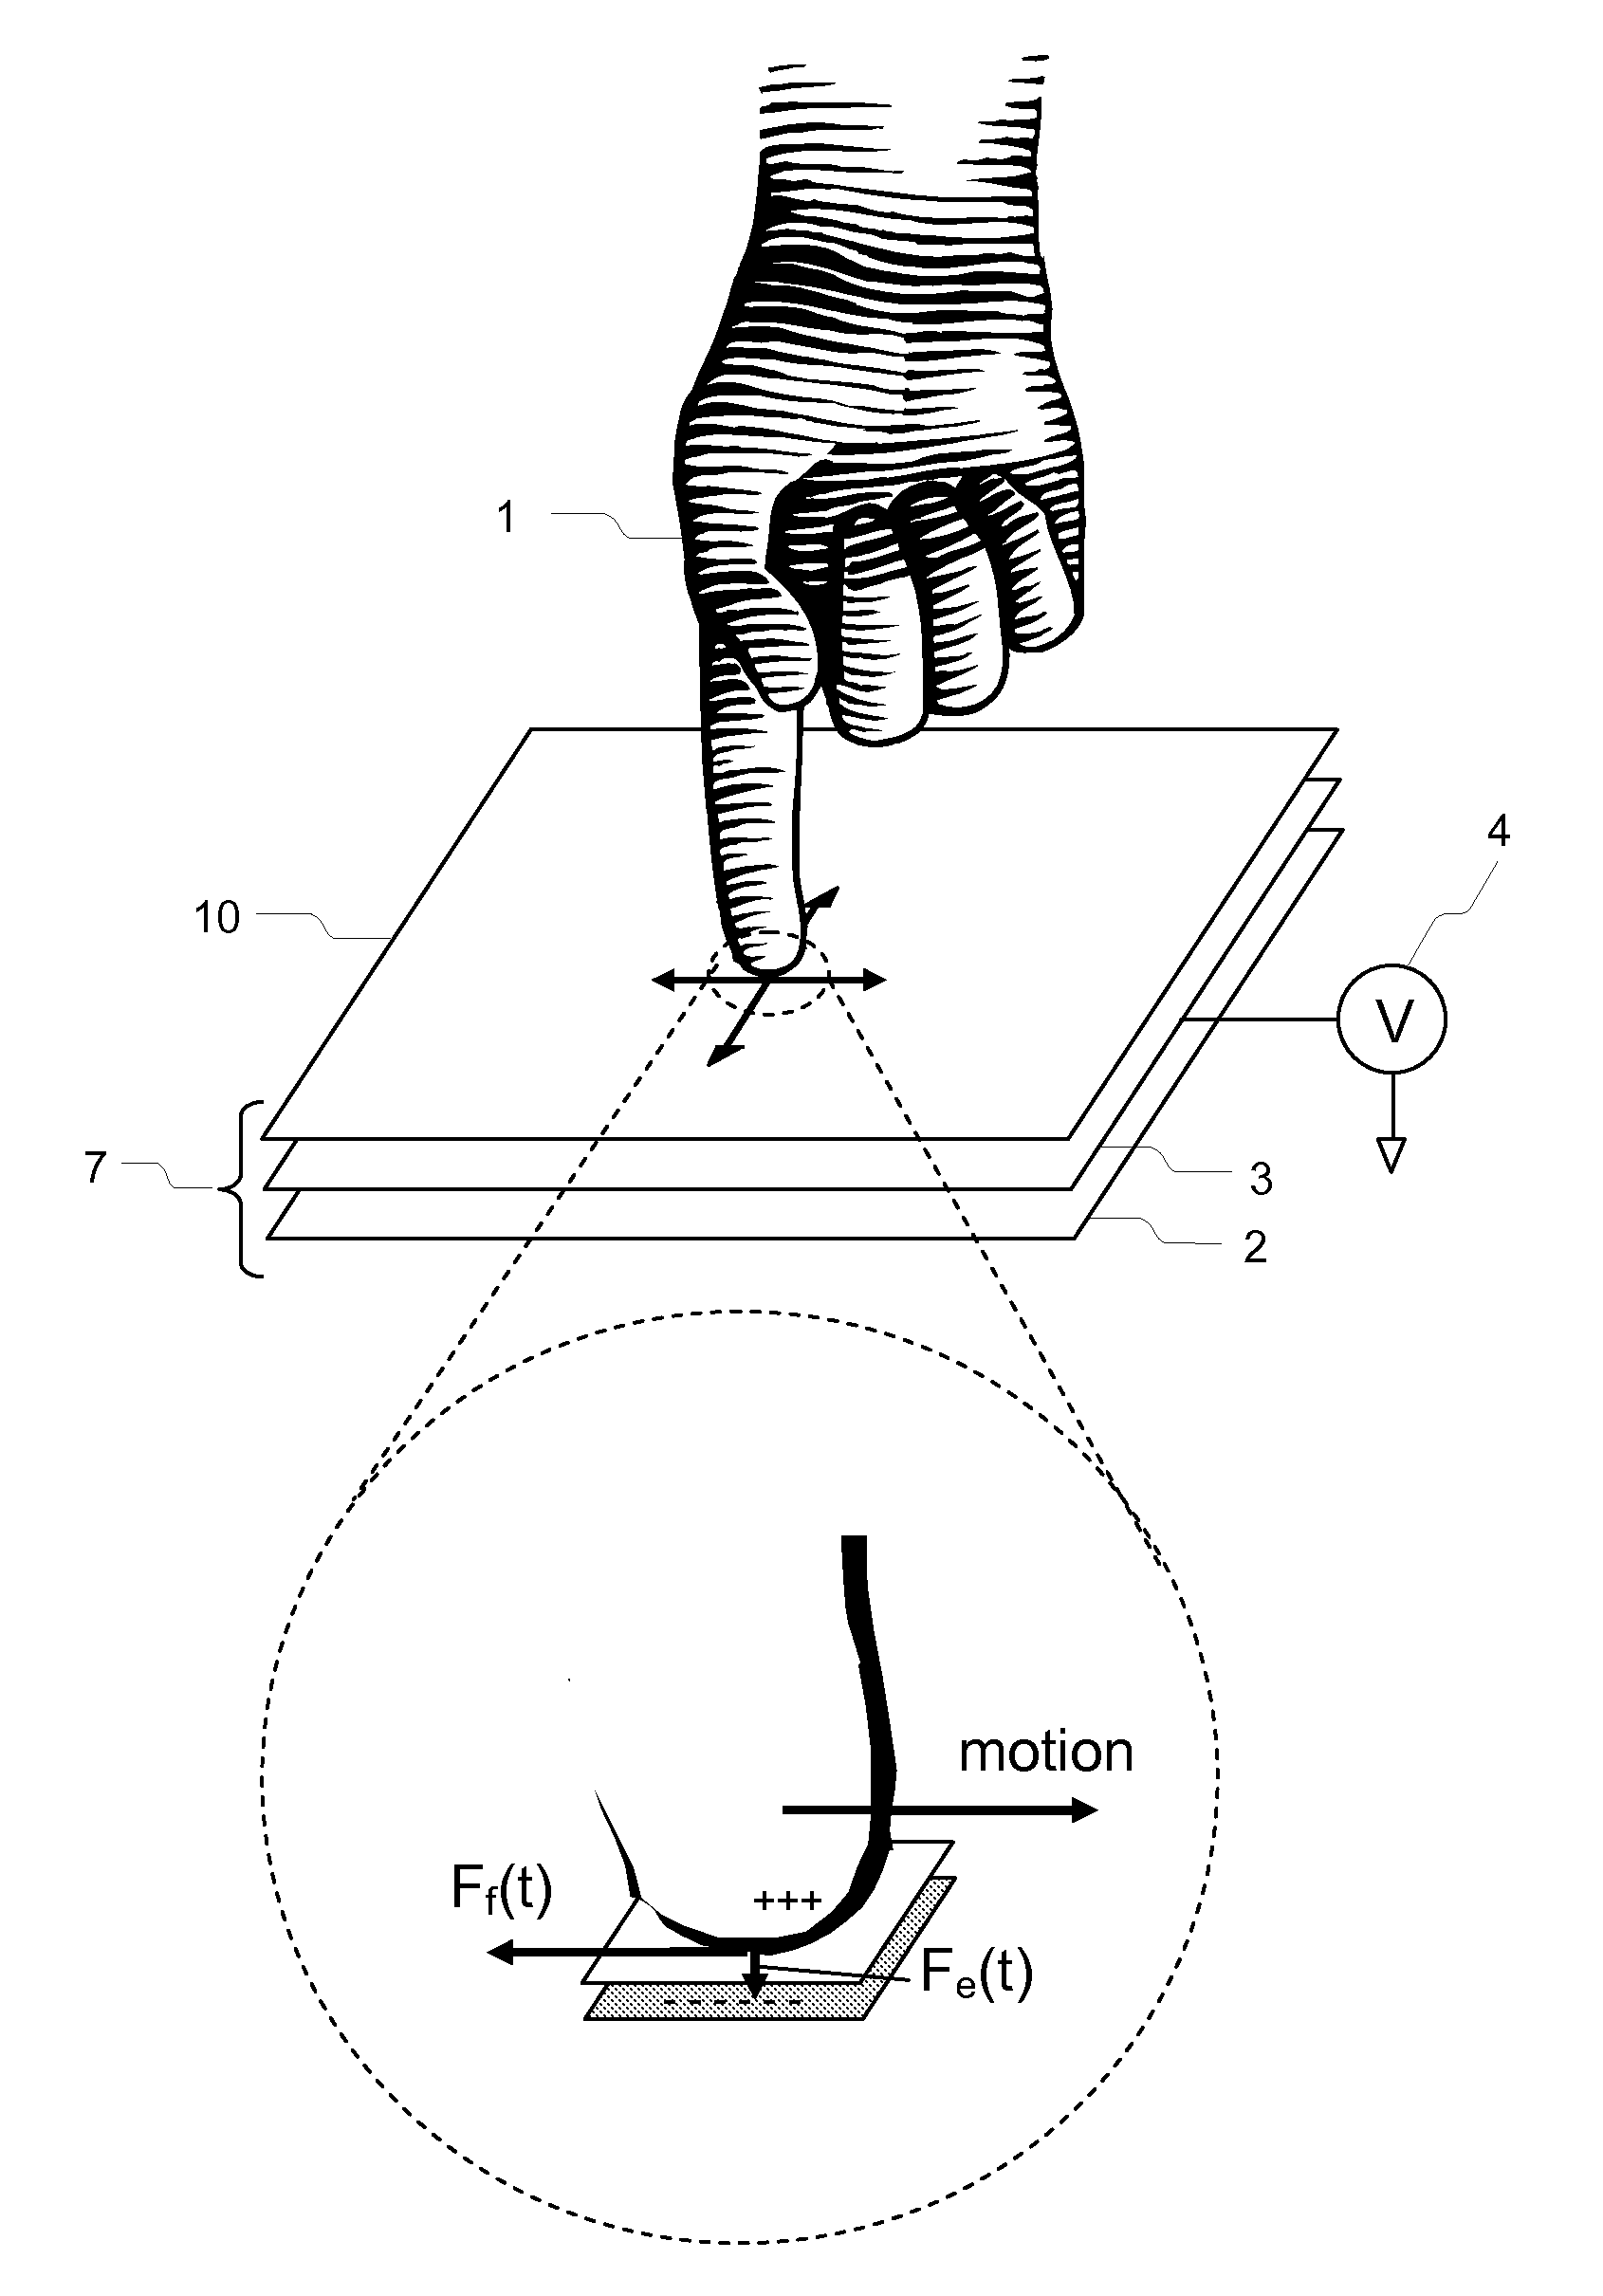 Touch-screen device including tactile feedback actuator